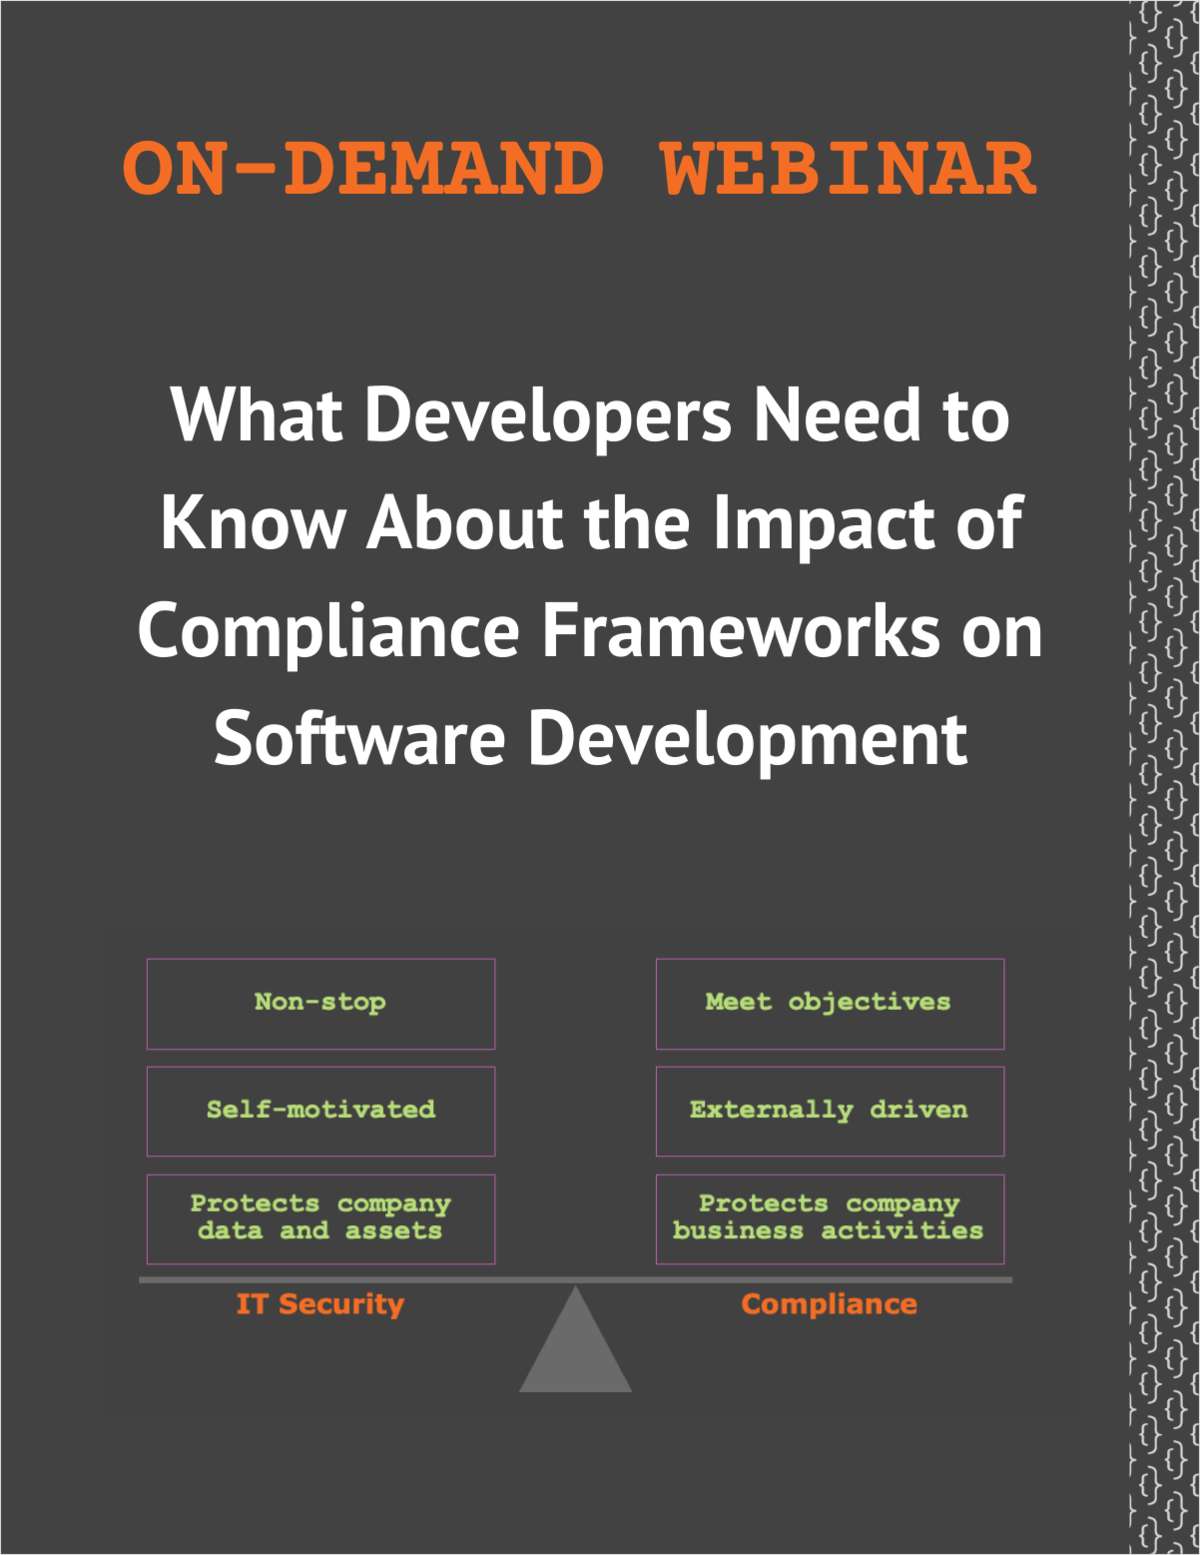 What Developers Need to Know About the Impact of Compliance Frameworks on Software Development